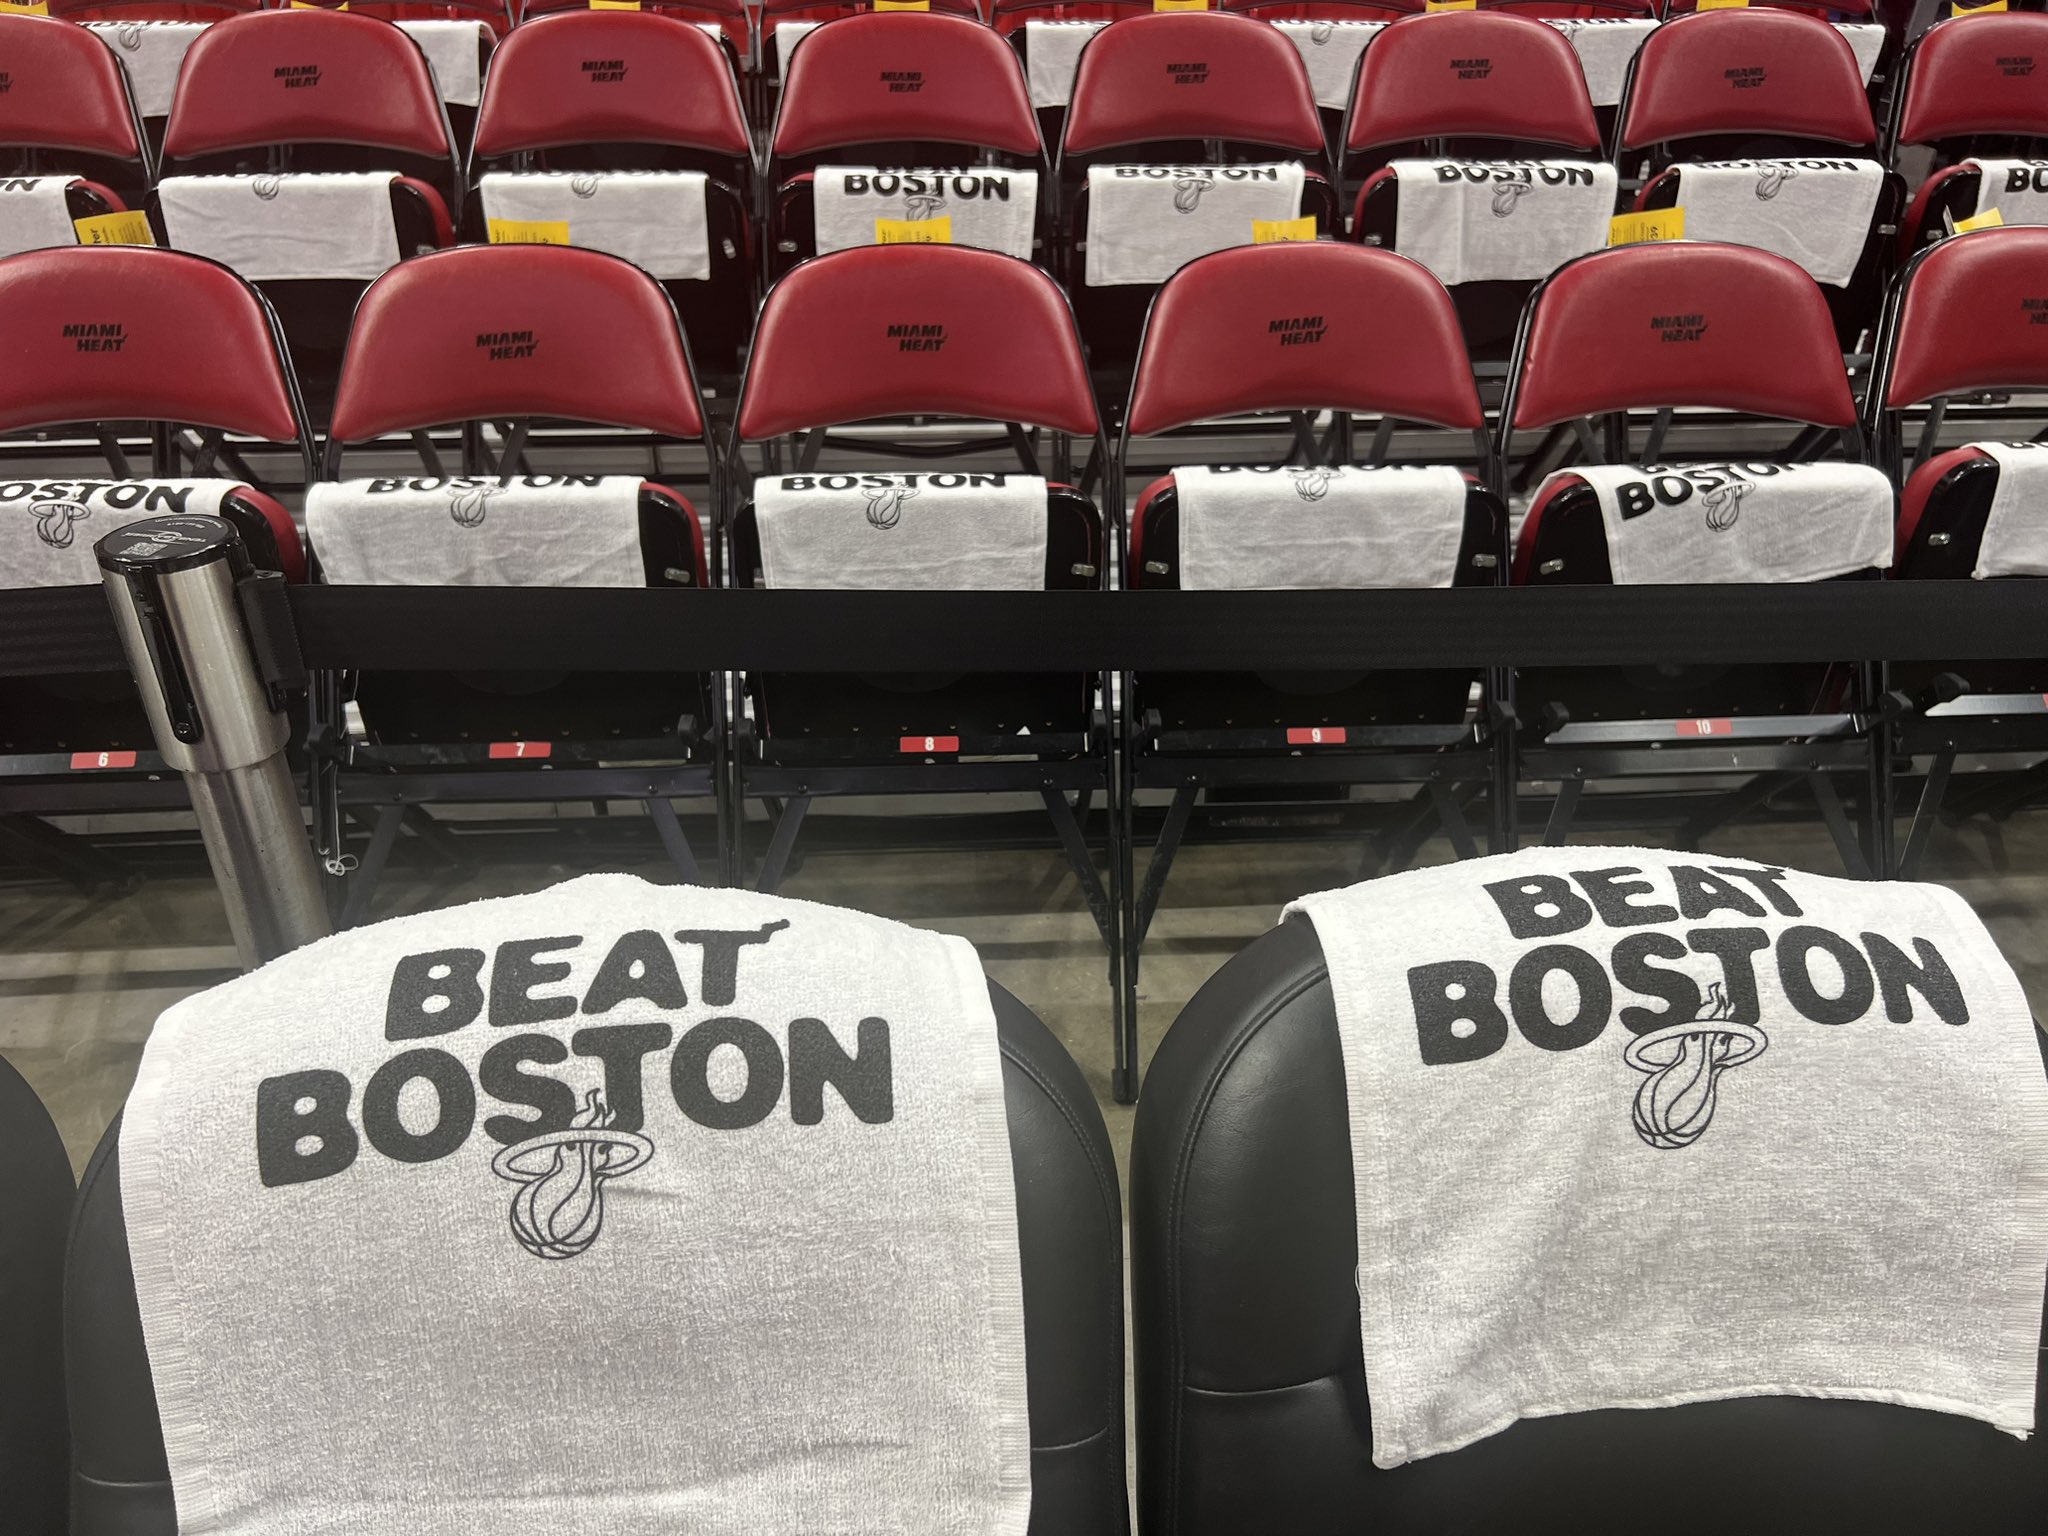 Will Manso "“Beat Boston” white hot towels on every seat Game 3 between the Heat-Celtics. https://t.co/WwcDRkL0It" / Twitter